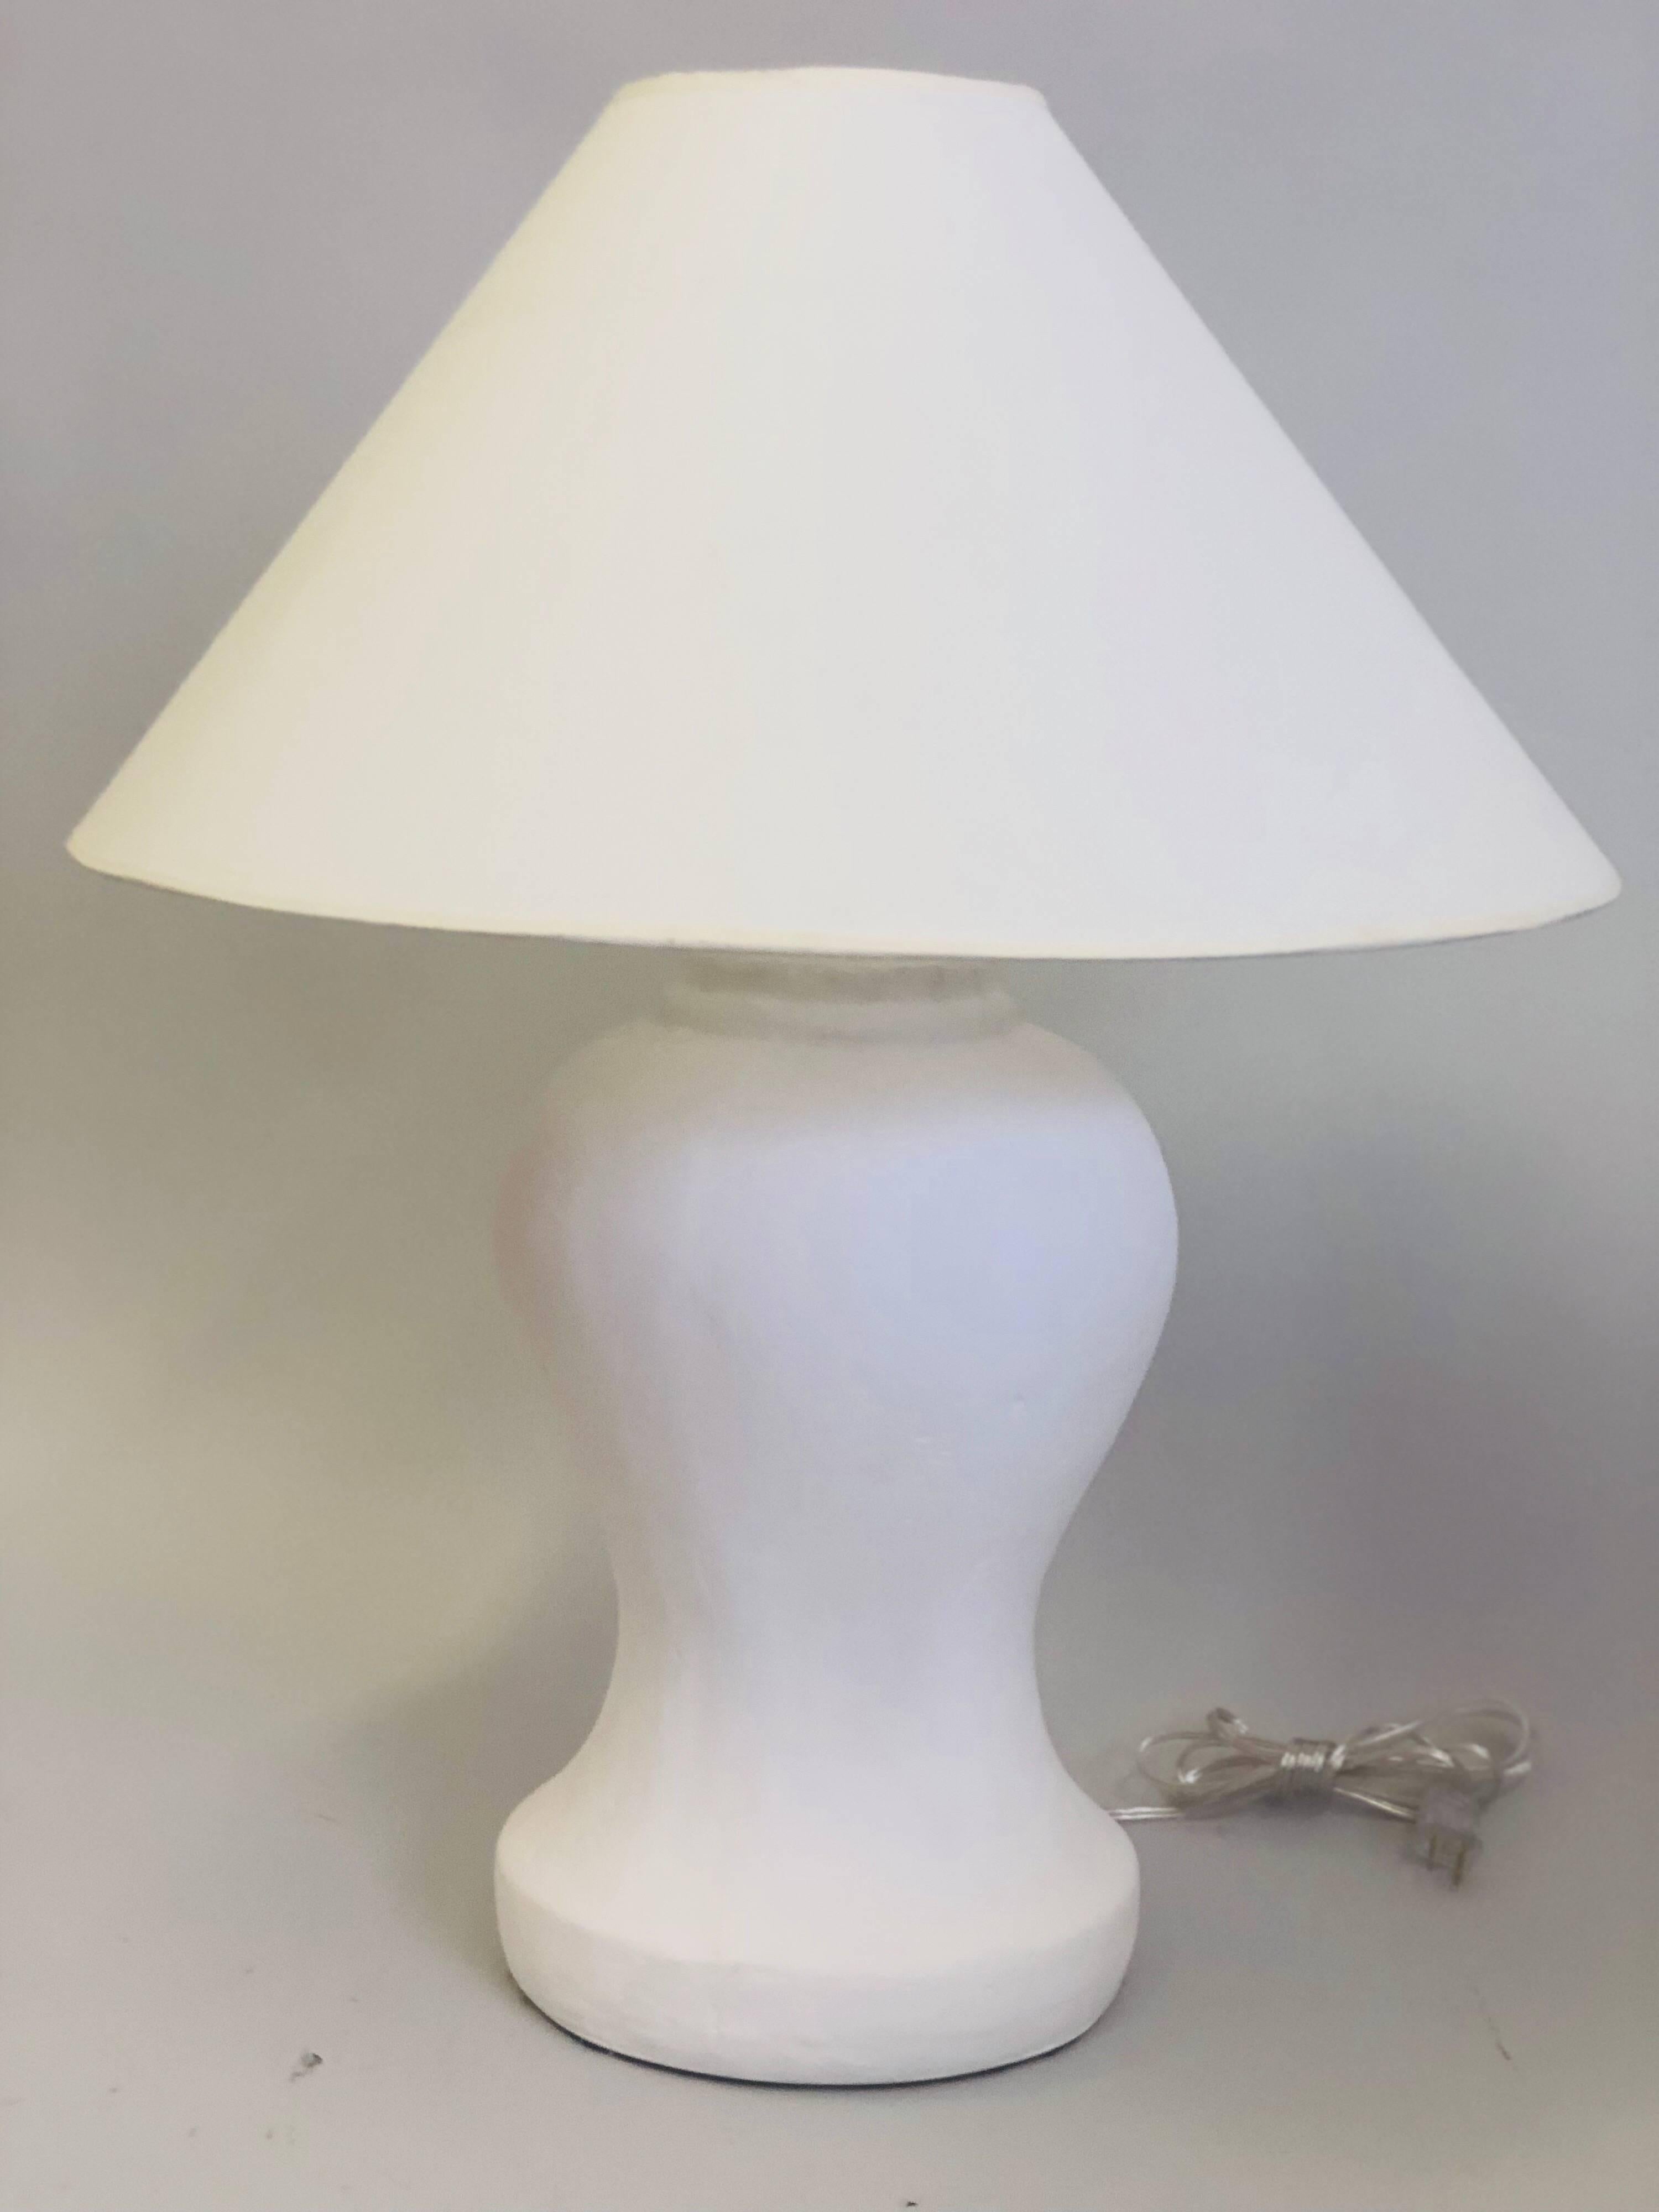 Pair of French Mid-Century Modern style white plaster table lamps from a model by Alberto Giacometti & Jean-Michel Frank. These lamps are based on a 1935 model by Alberto Giacometti for the Marianne table lamp. A variation of that lamp was later